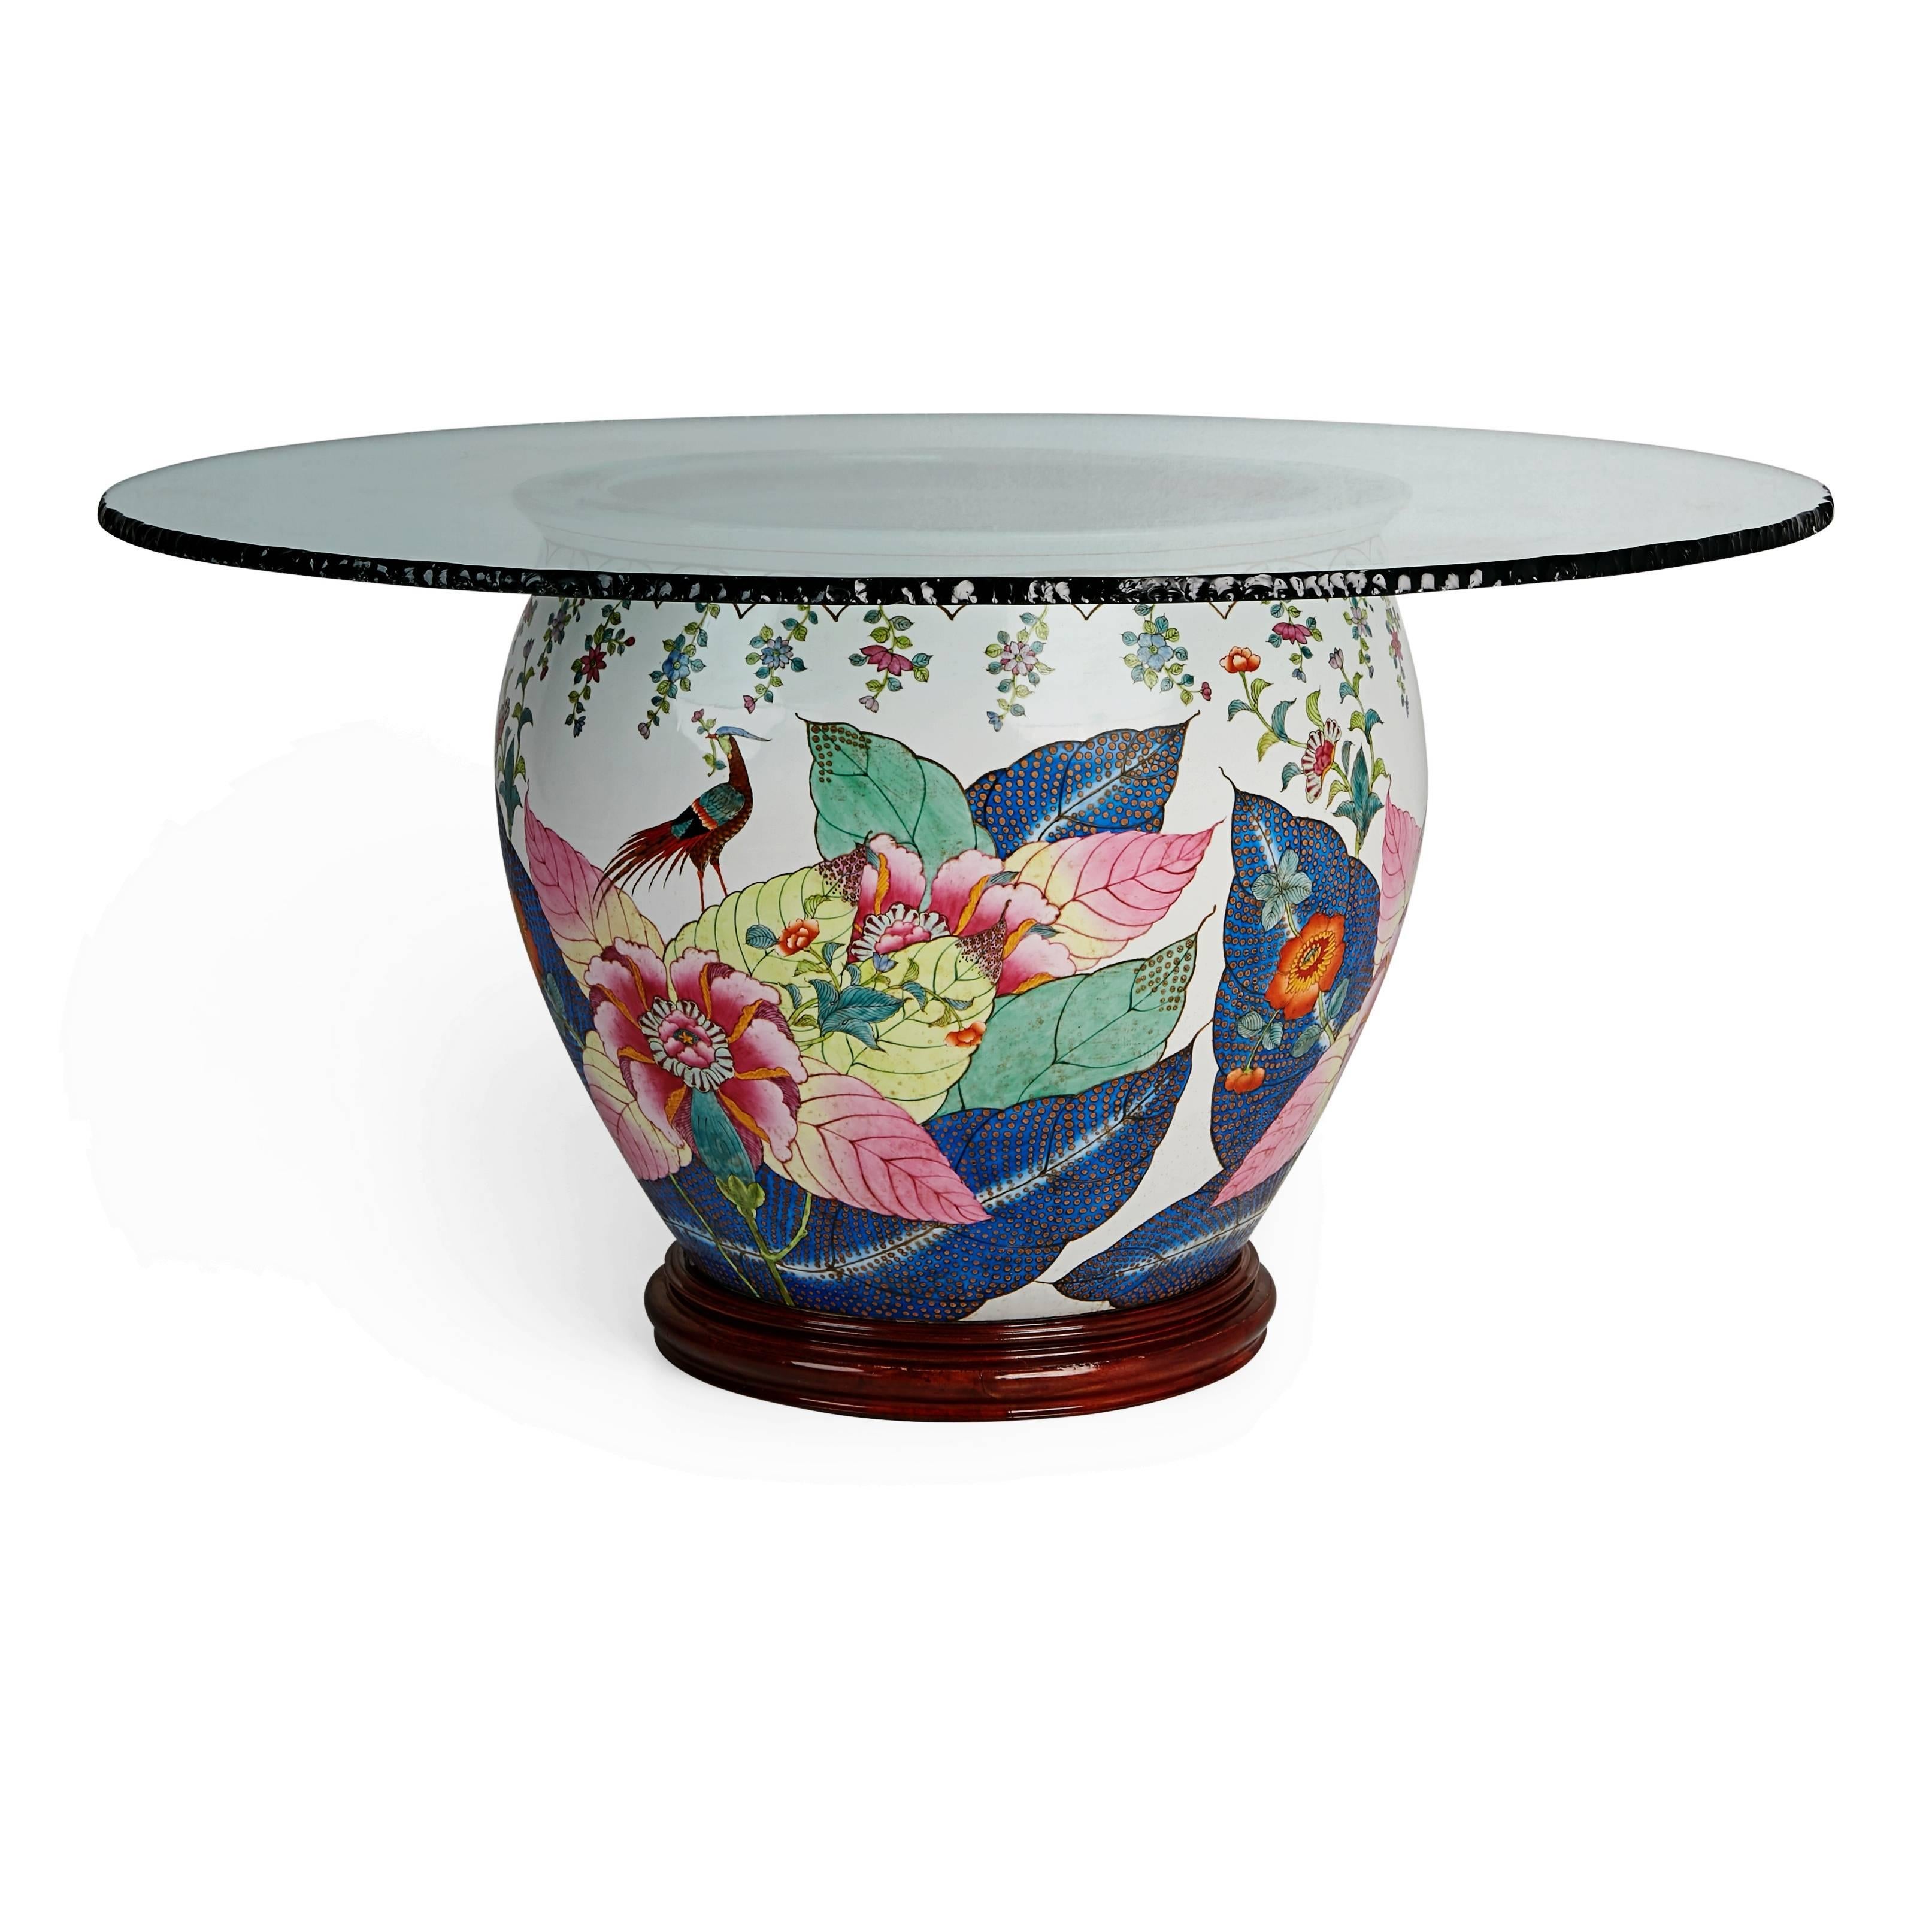 *NOTE* For all items from this dealer, please click VIEW ALL FROM SELLER below on this page.

Elegantly designed chinoiserie style dining table. Featuring a glazed porcelain urn style base which has been hand-painted with colorful floral decoration